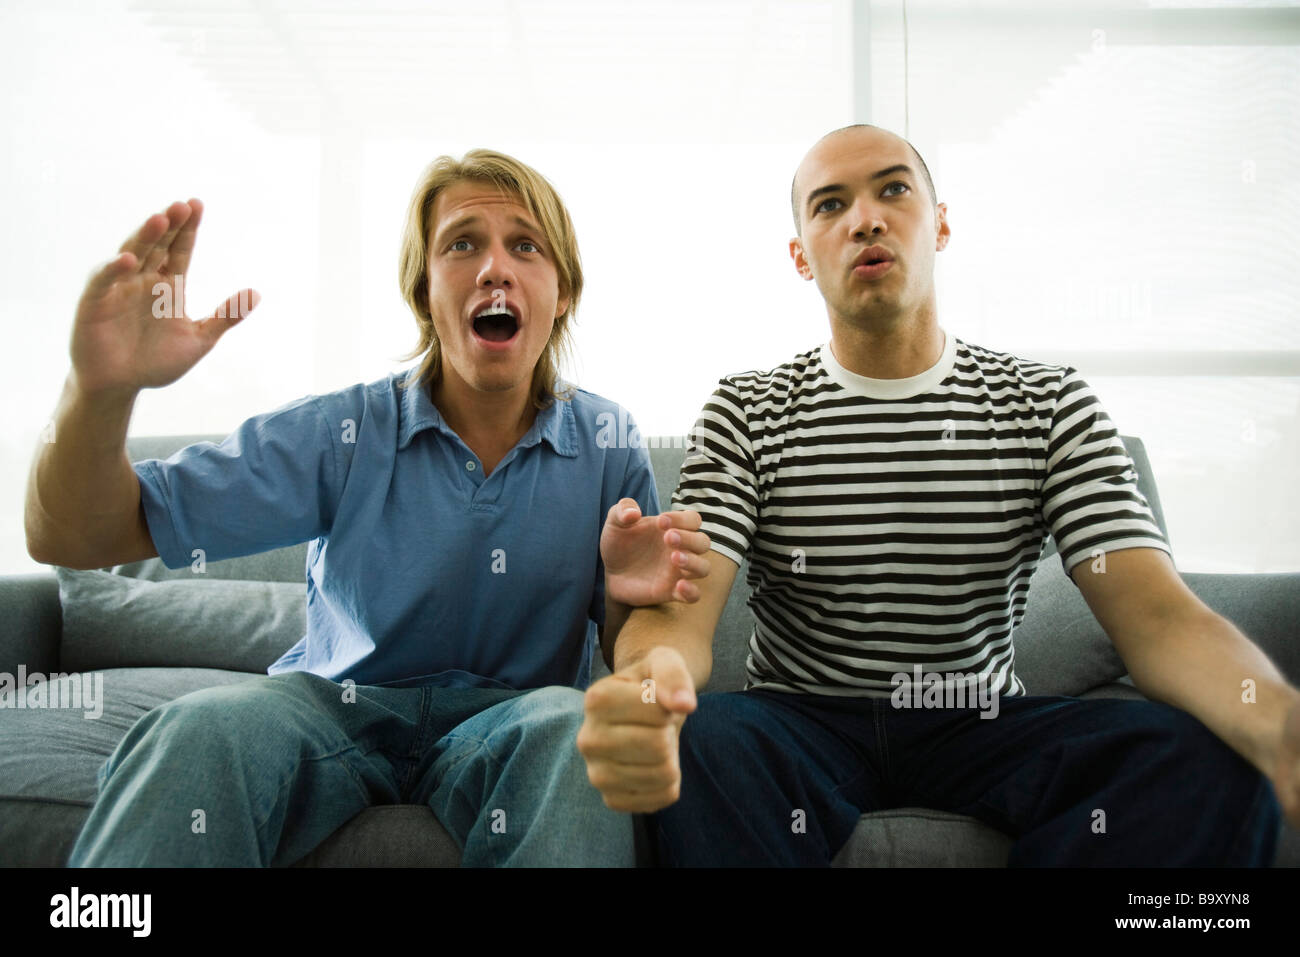 Two men sitting on sofa watching TV, hands in air Stock Photo